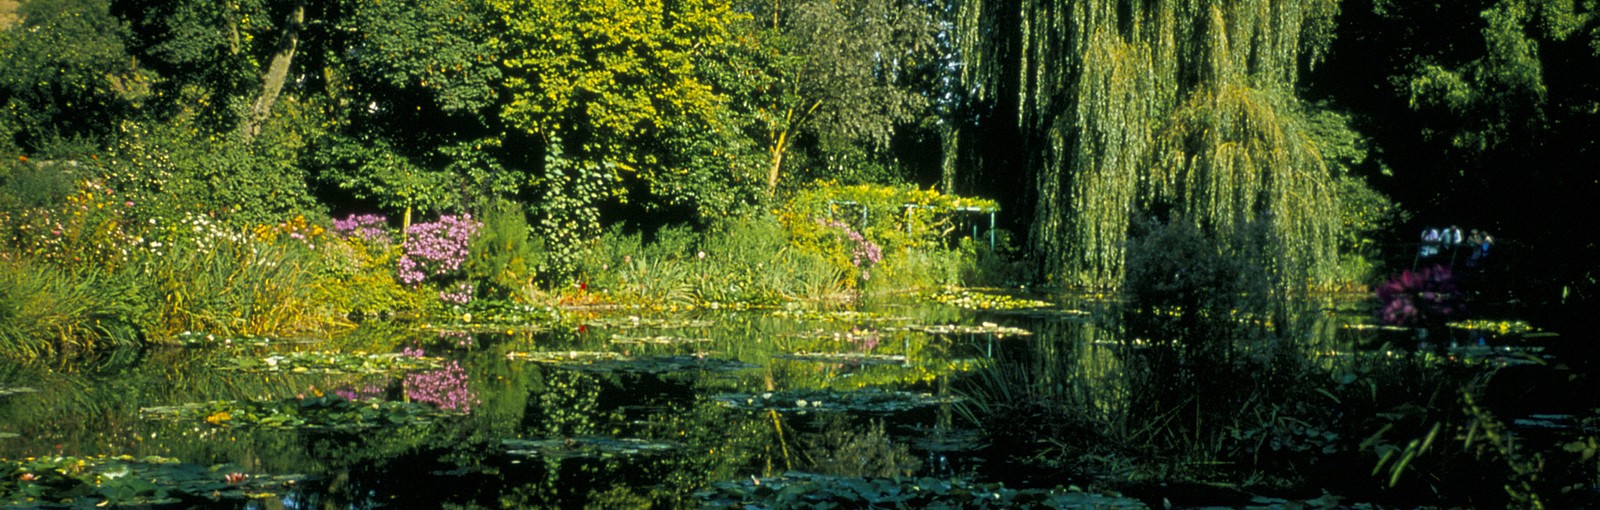 Tours Giverny and Auvers-sur-Oise - Full days - Day tours from Paris